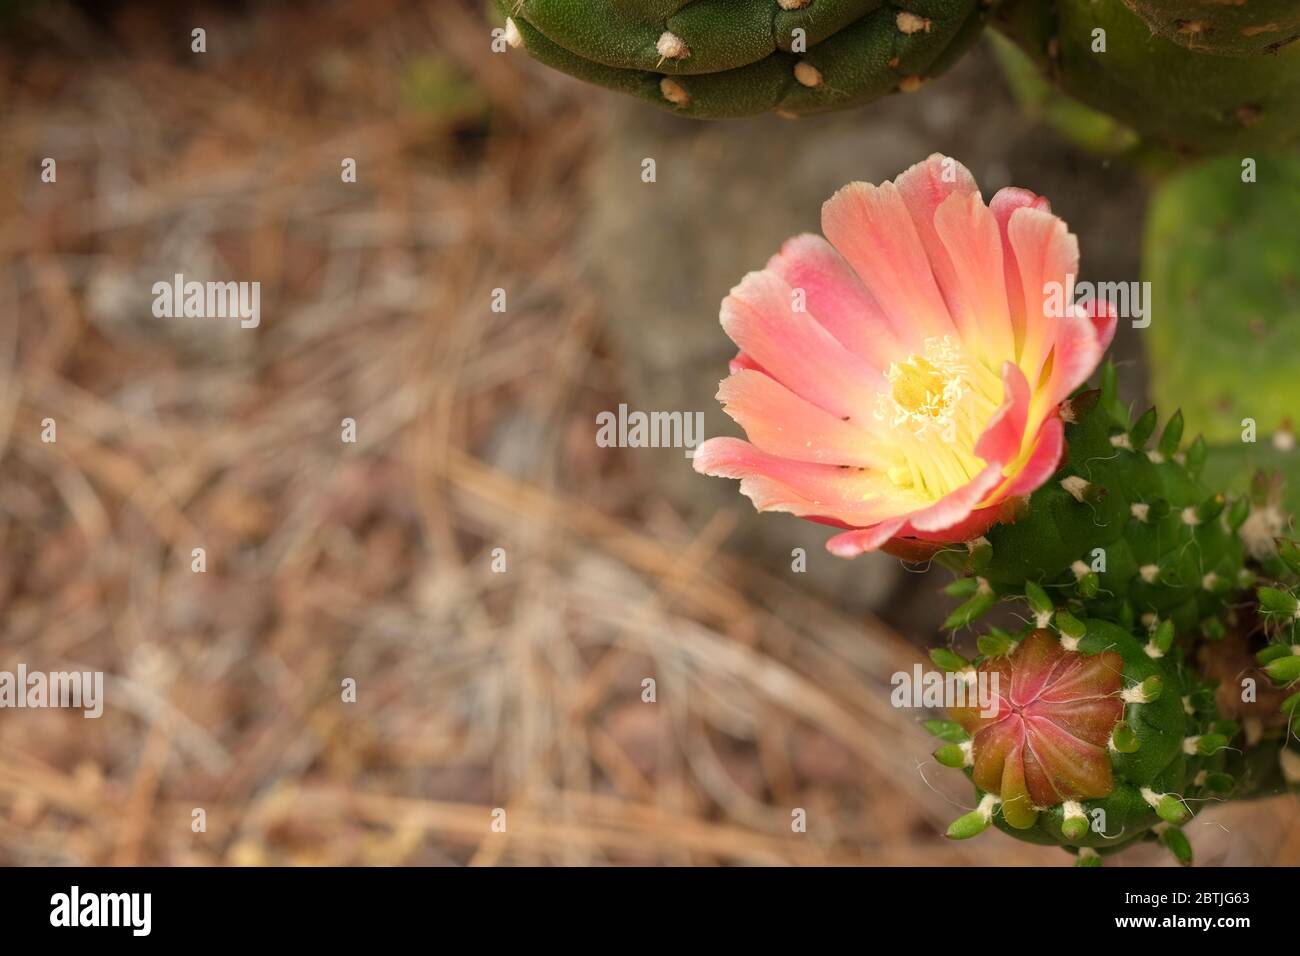 Lovely red and pink cactus flowers. Stock Photo